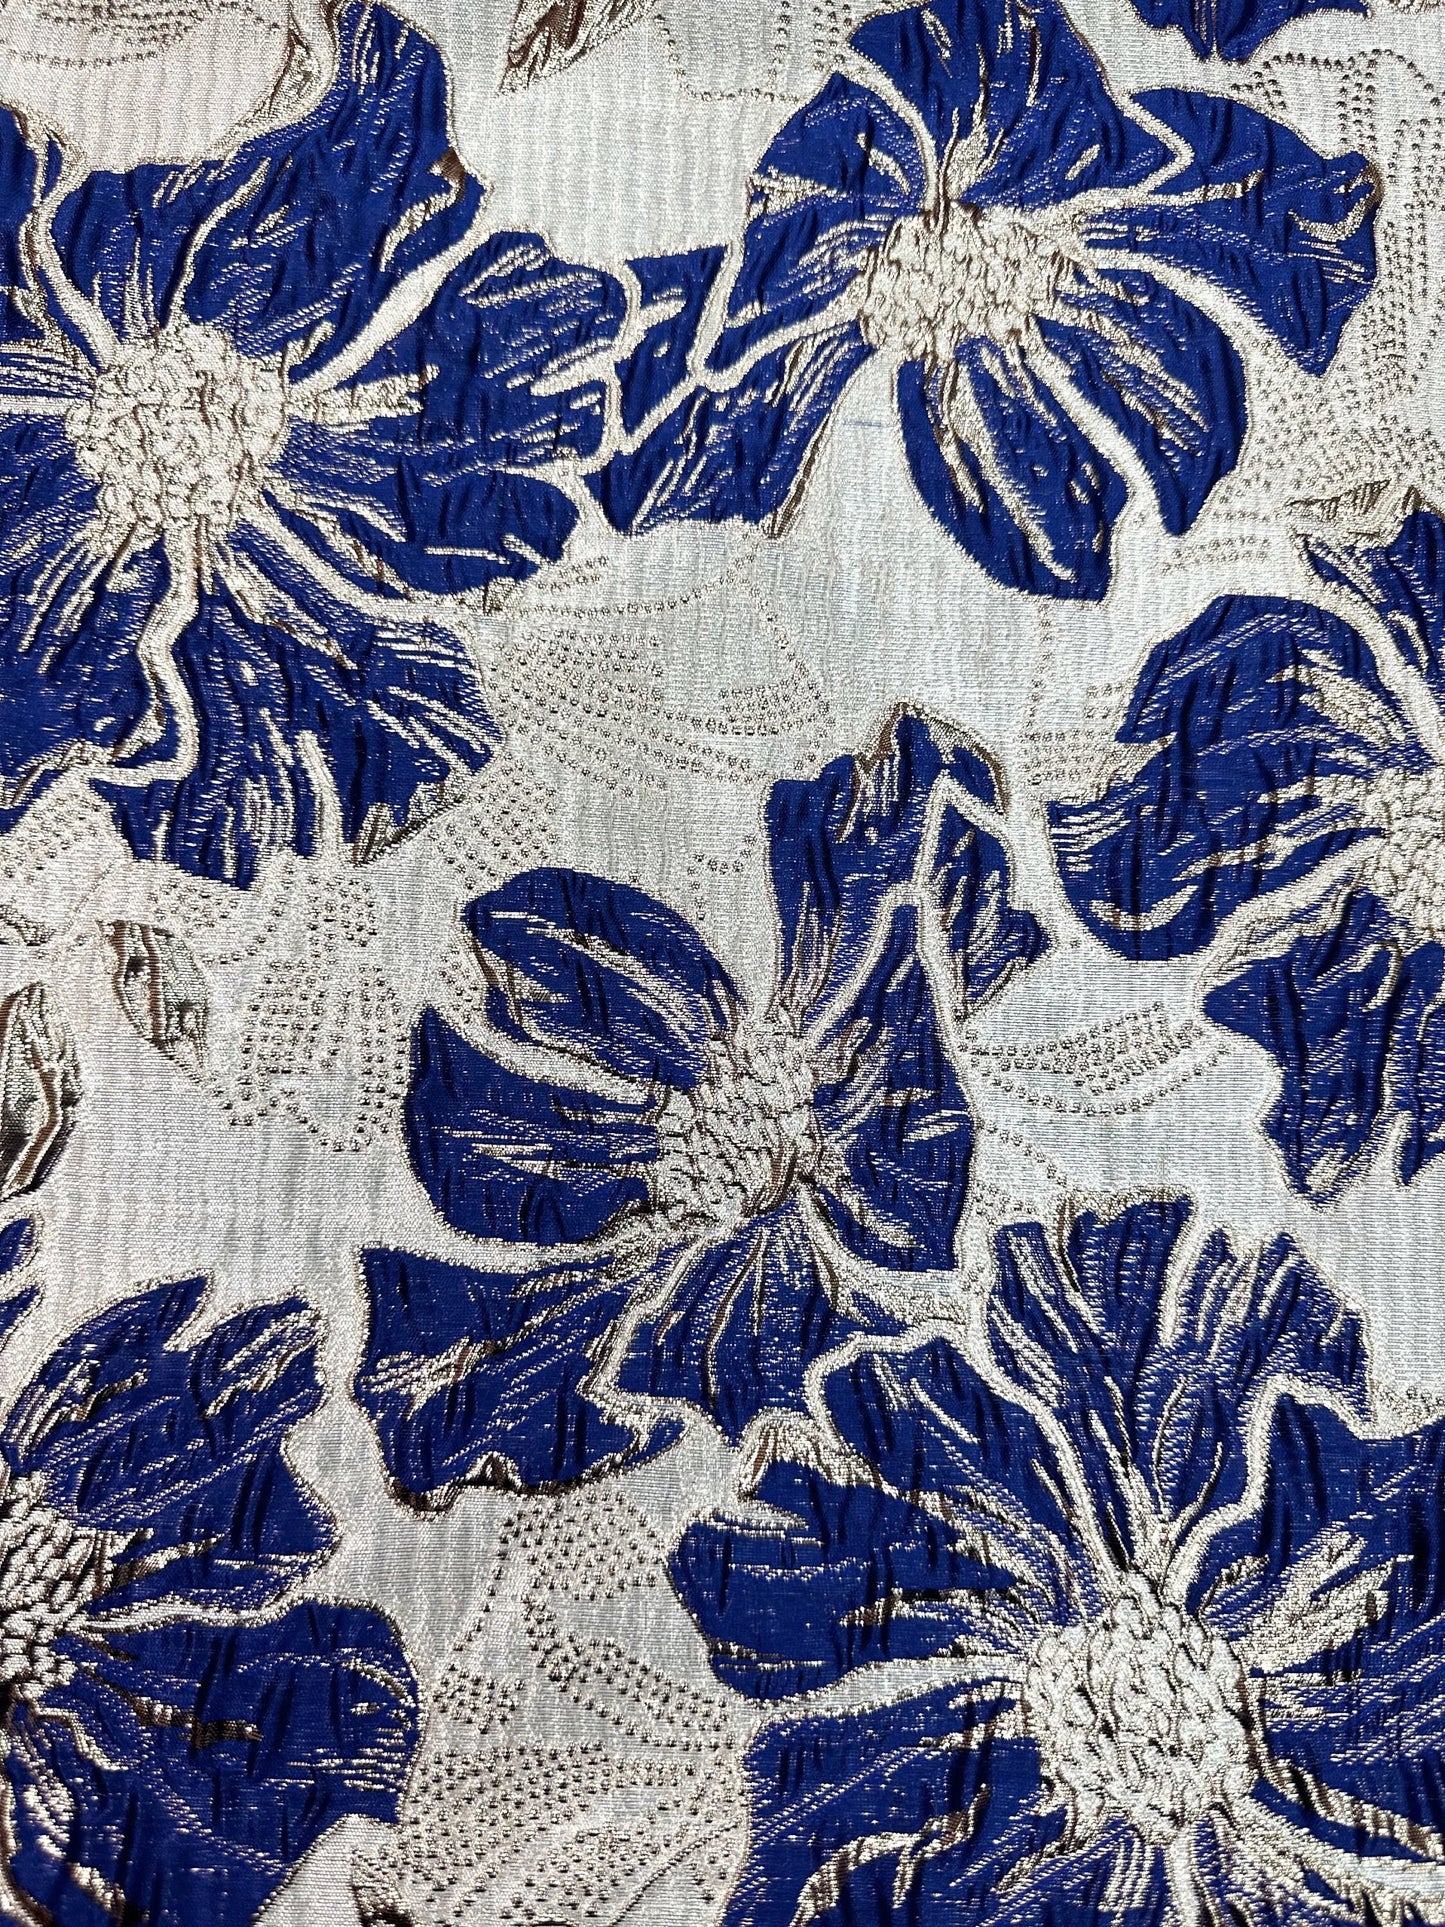 ROYAL BLUE GOLD Floral Brocade Fabric (60 in.) Sold By The Yard